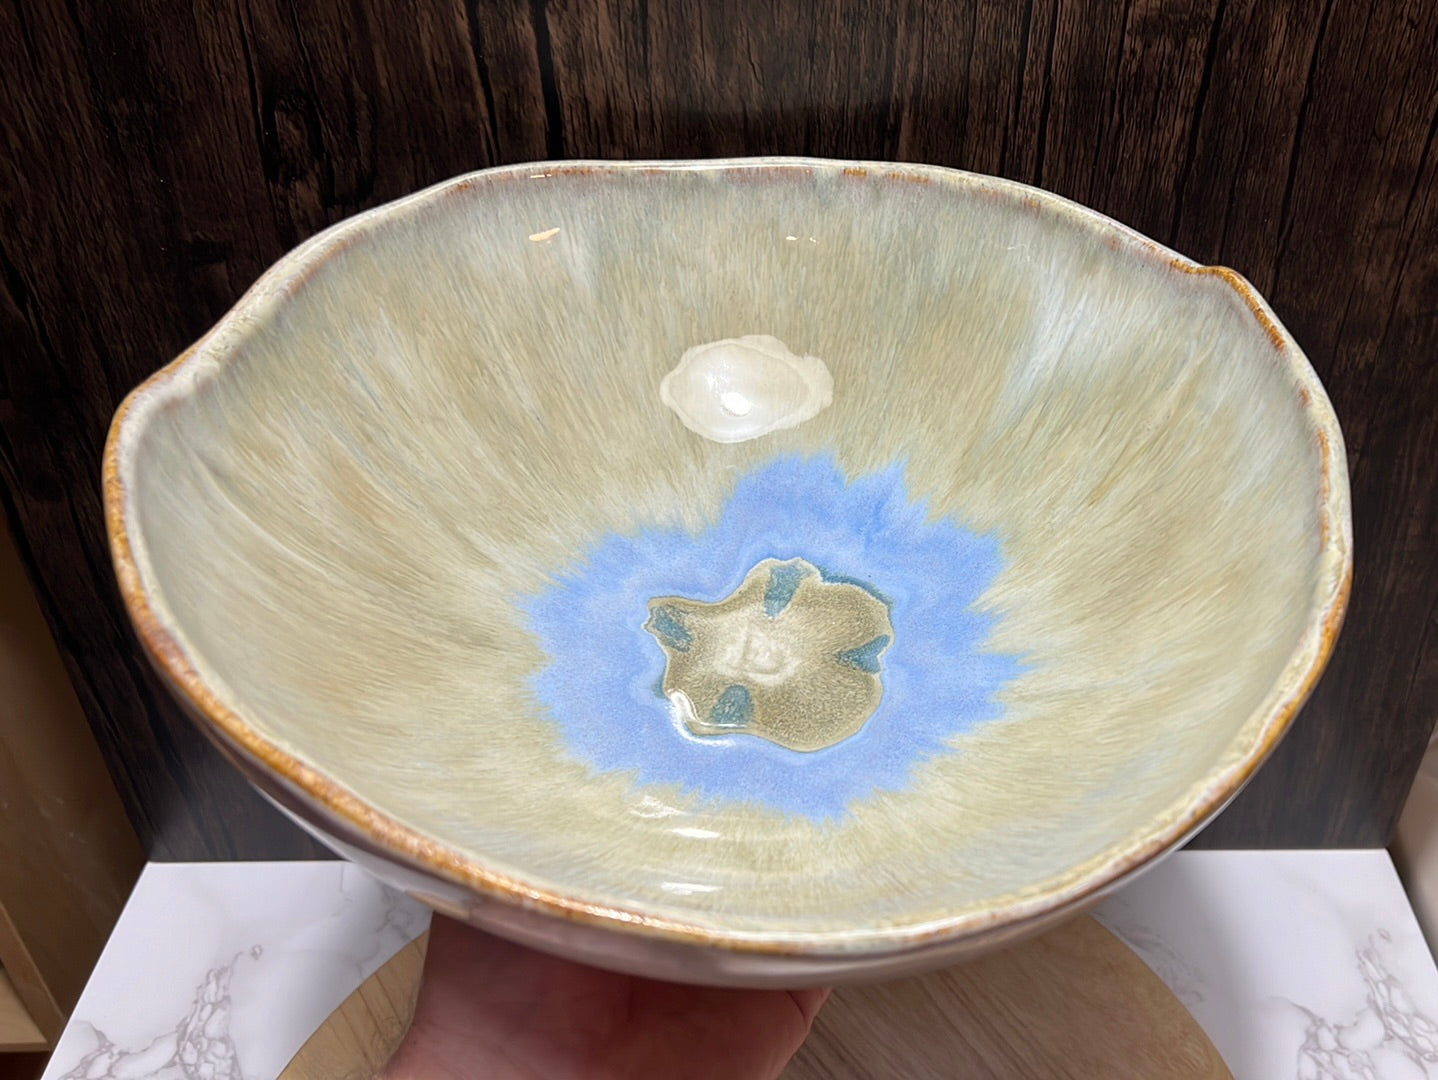 Centerpiece Serving Bowl | ROCK HOME Collection | 11.5 long x 11” wide x 4” tall